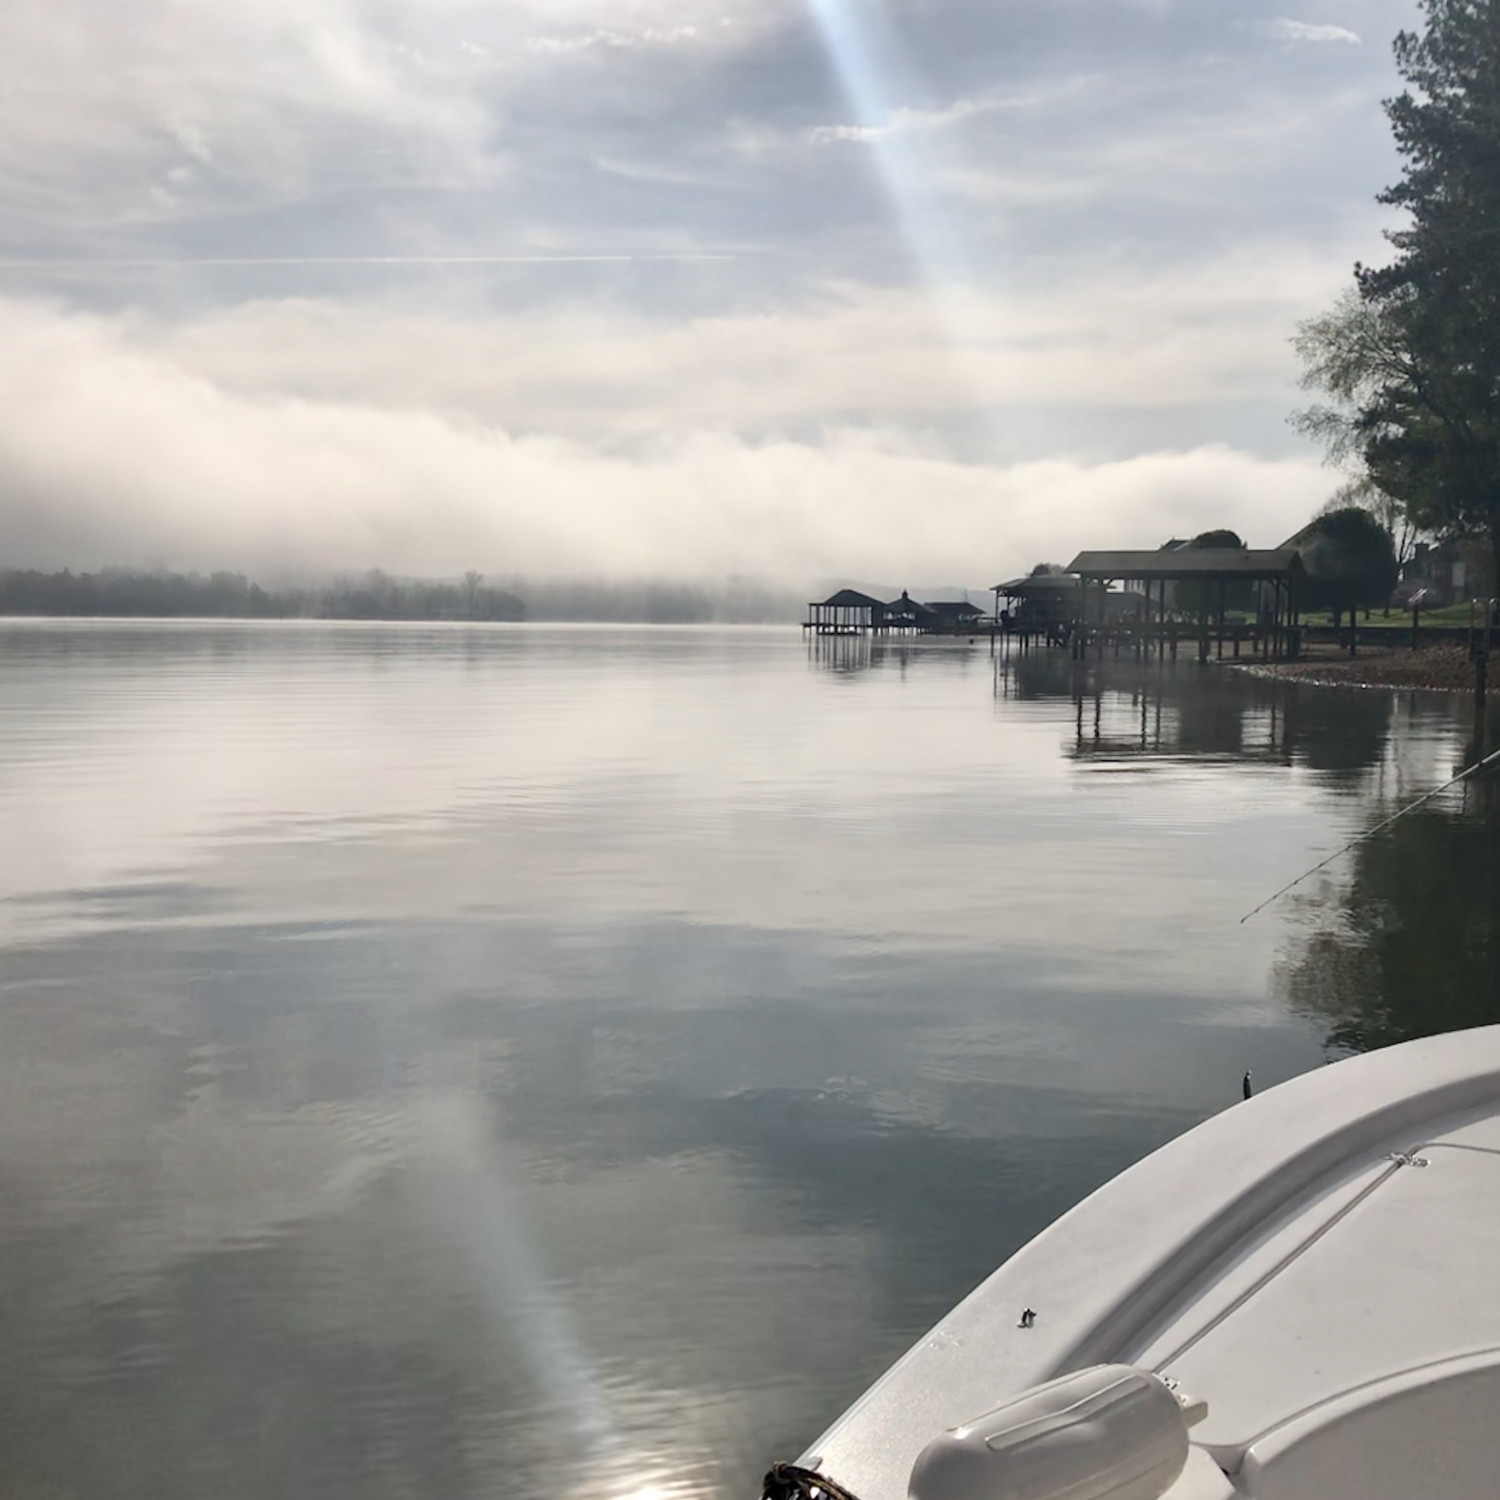 Maiden fishing voyage on the new Masters 207 with my daughter on a very foggy morning on Tellico Lake. The...